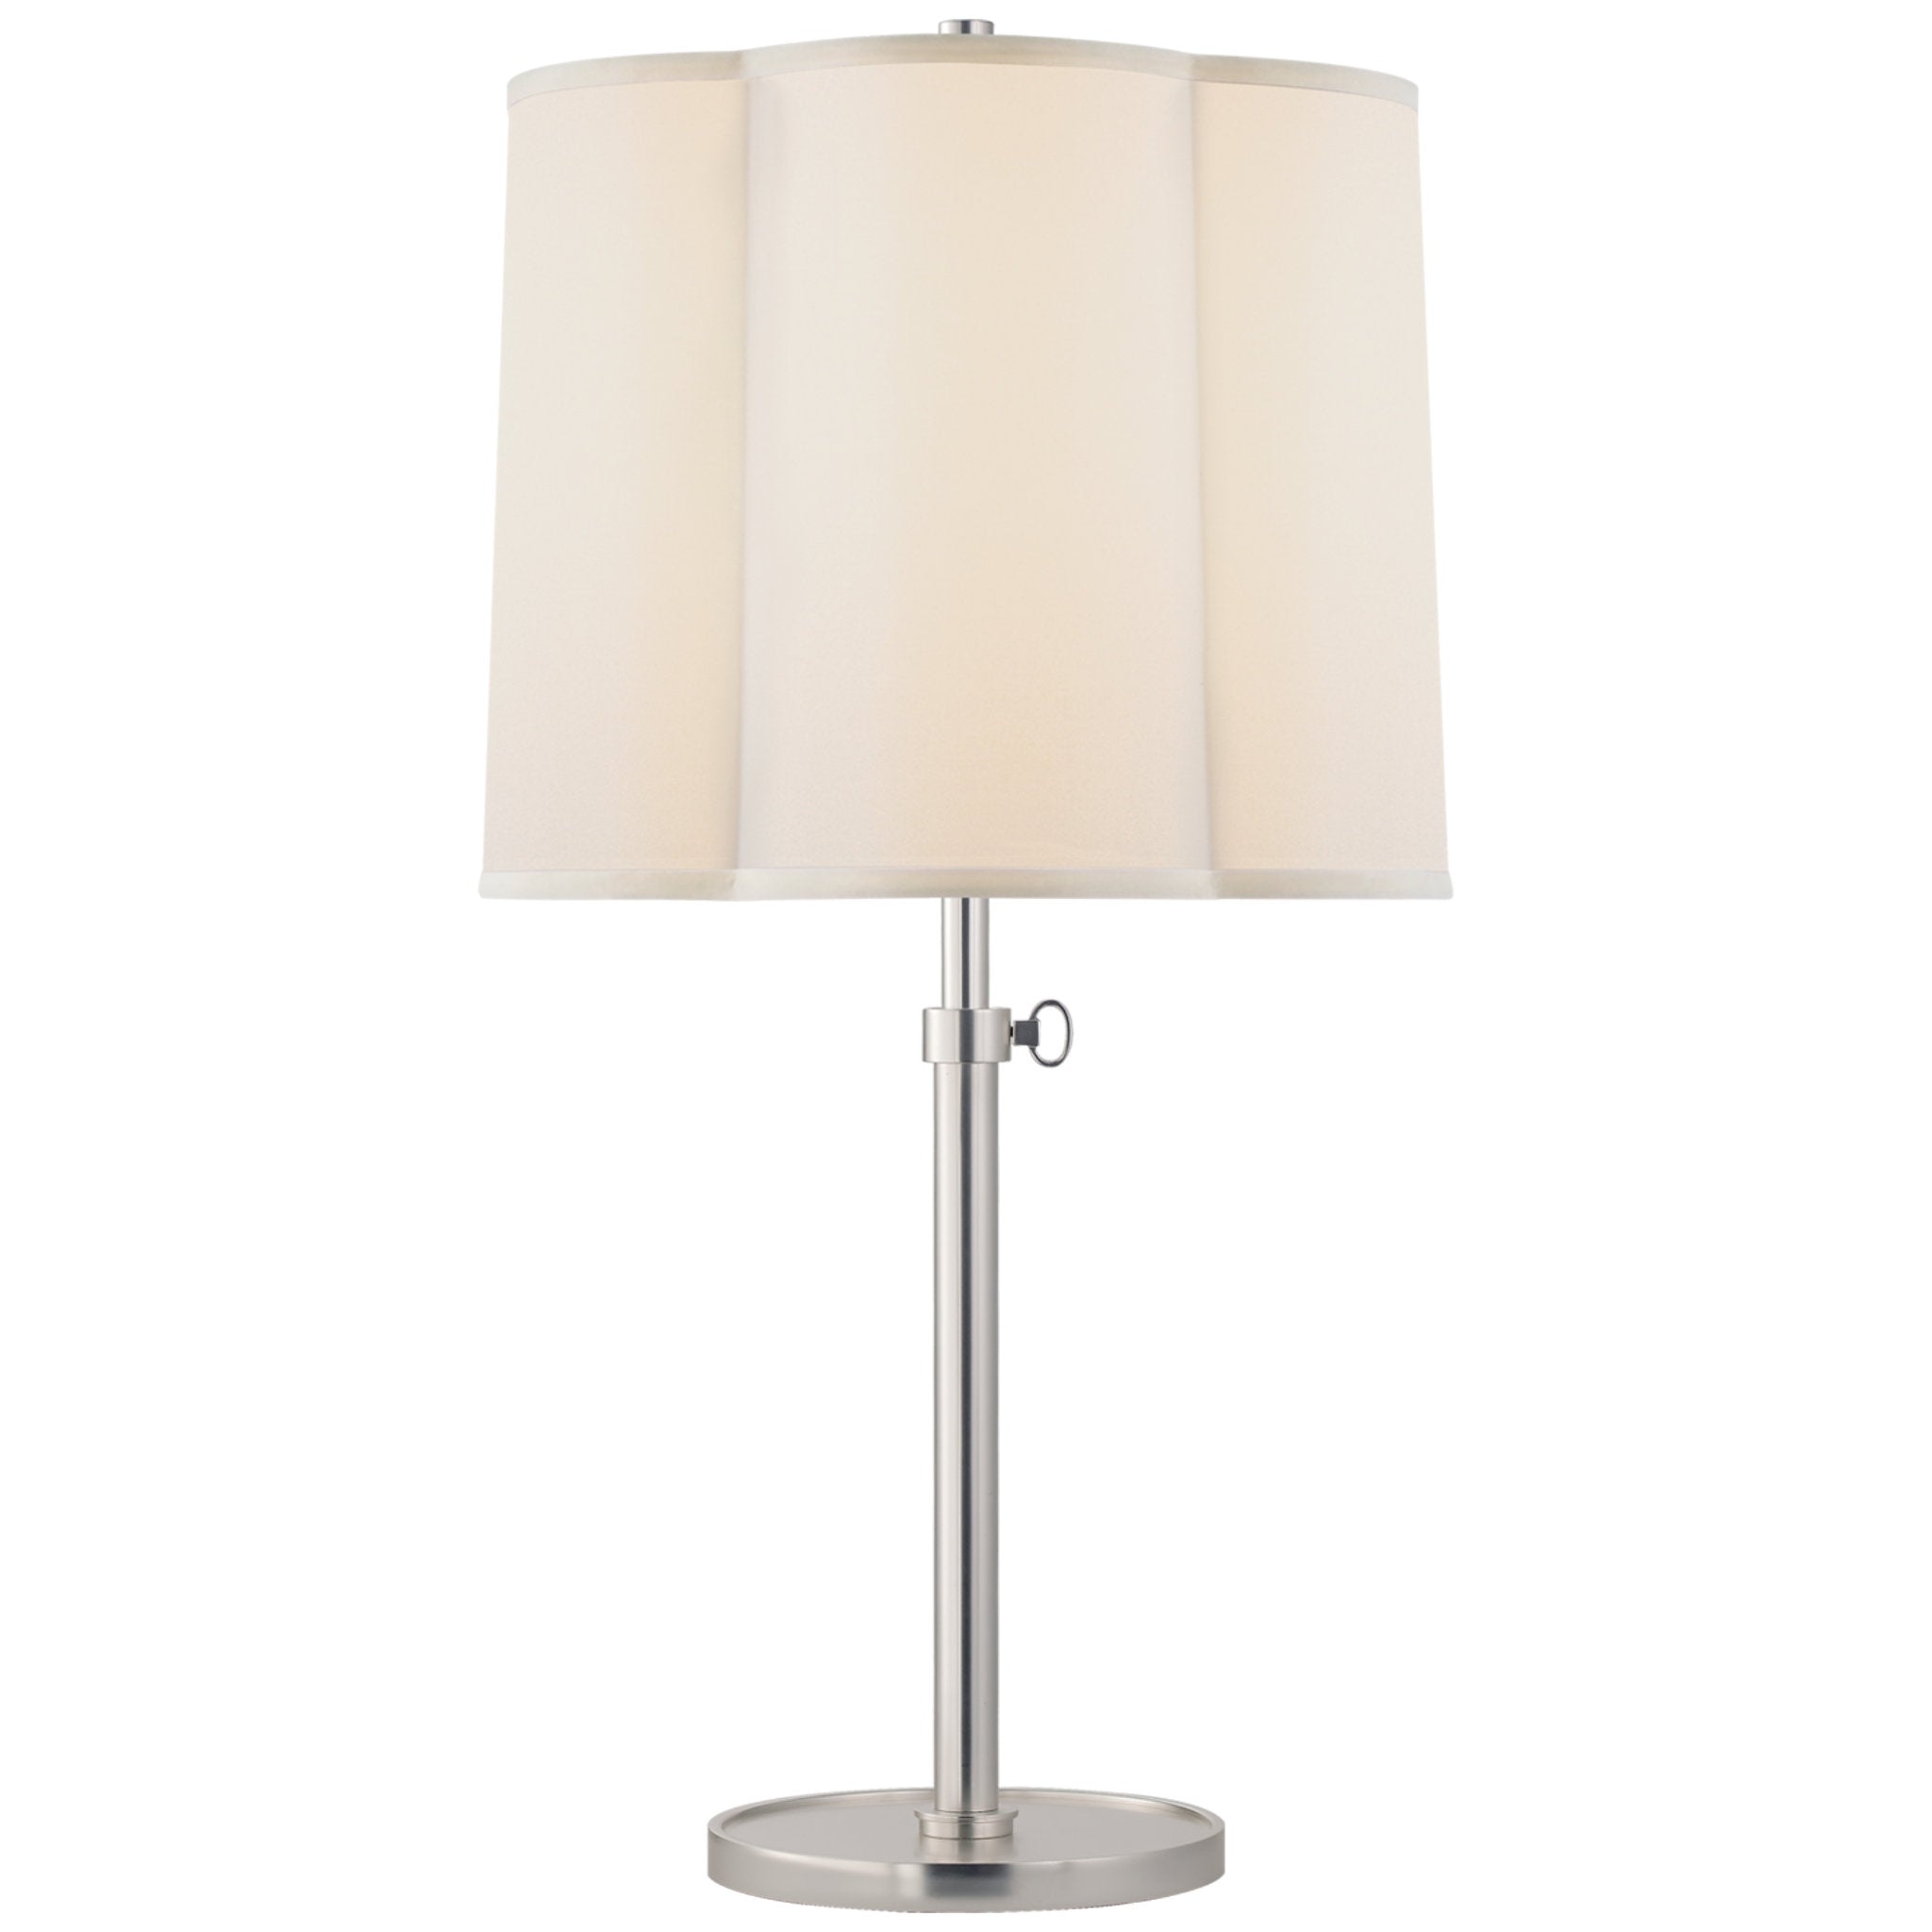 Barbara Barry Simple Adjustable Scallop Table Lamp in Soft Silver with Silk Shade